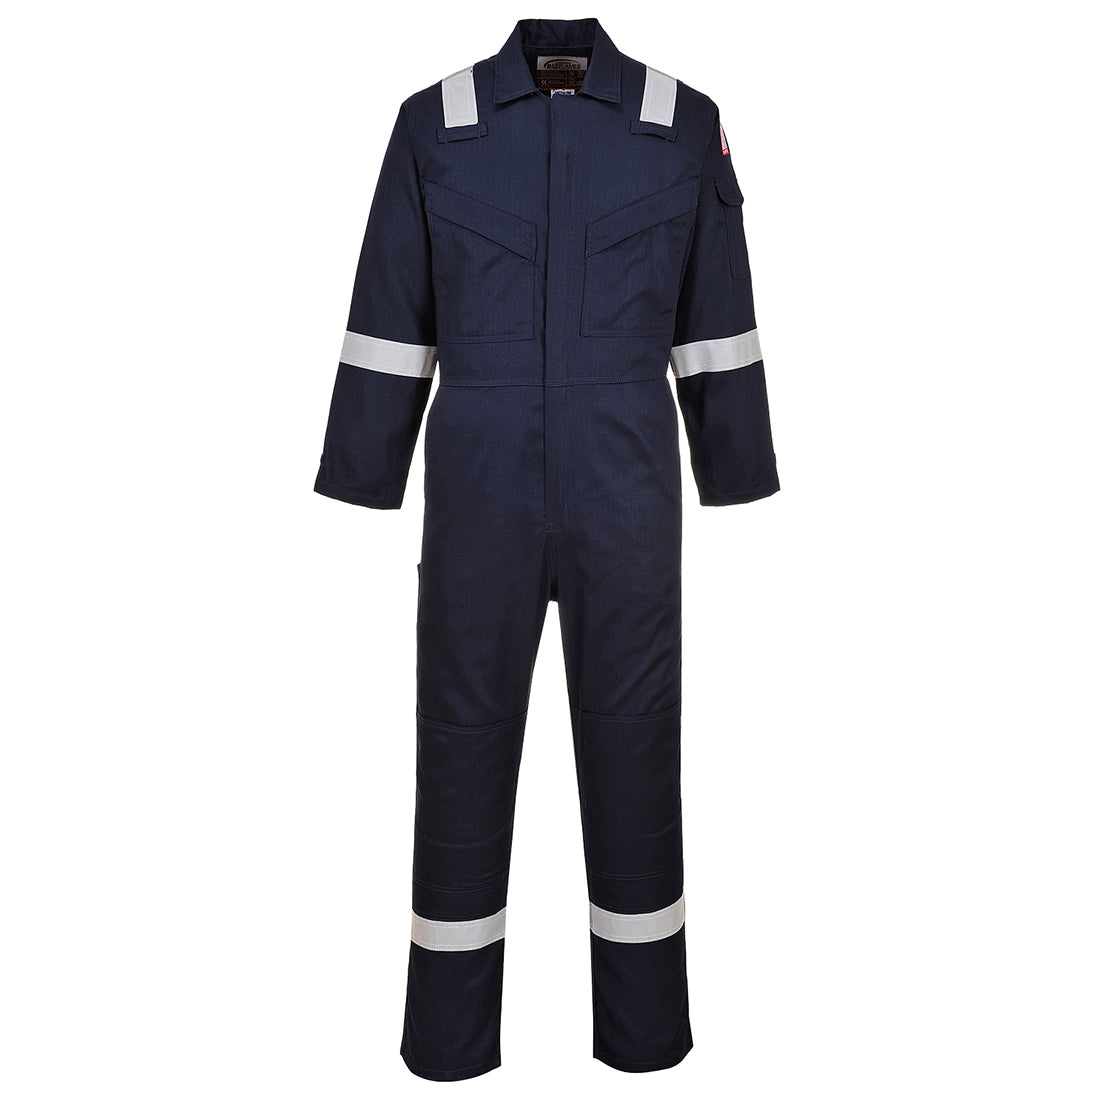 BIZFLAME LIGHT FIREPROOF AND ANTISTATIC COVERALLS